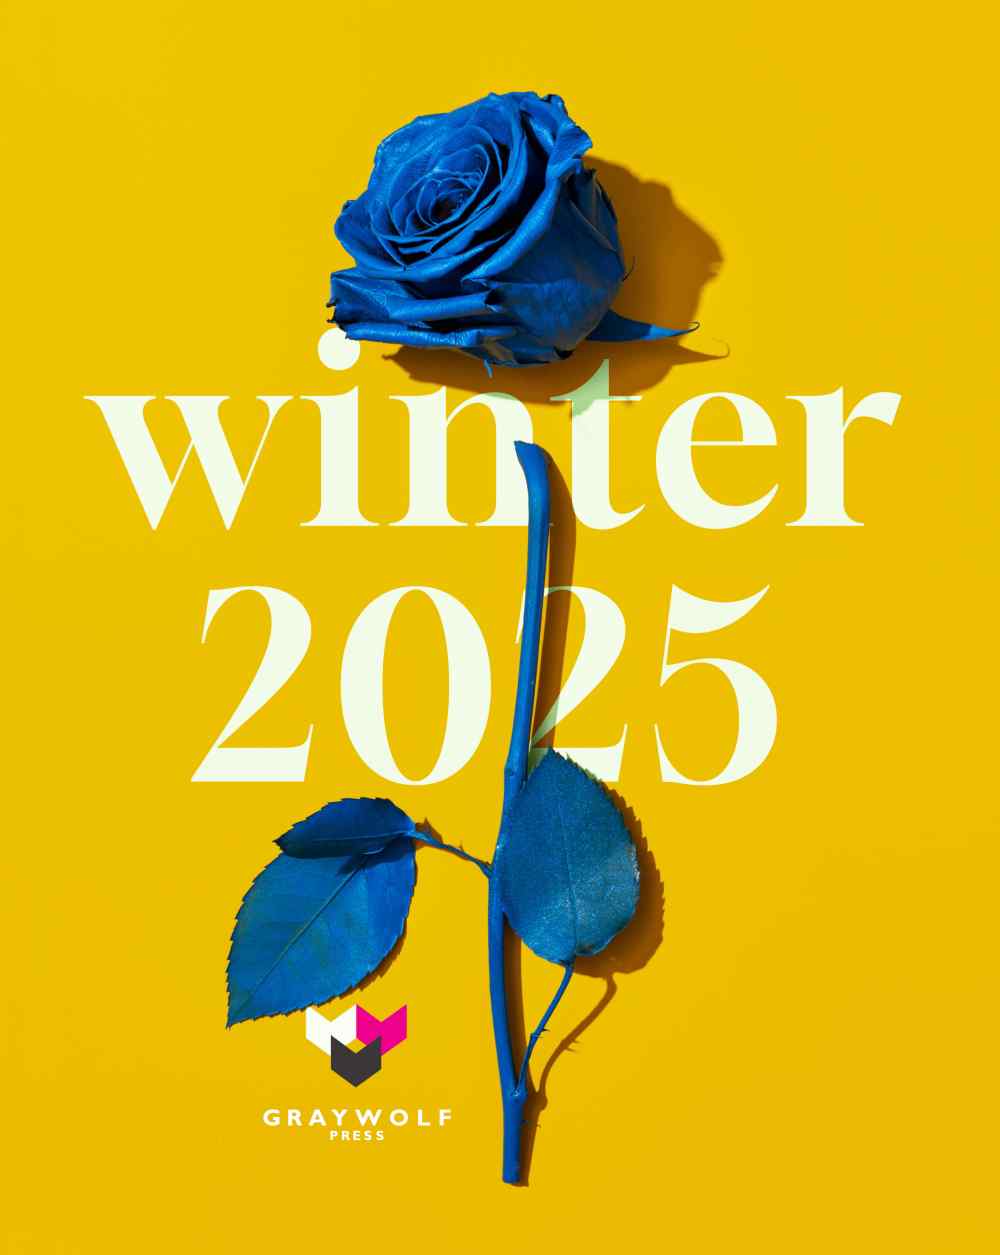 catalog cover with blue rose on yellow background. it reads "Winter 2025" with Graywolf logo in lower left corner.